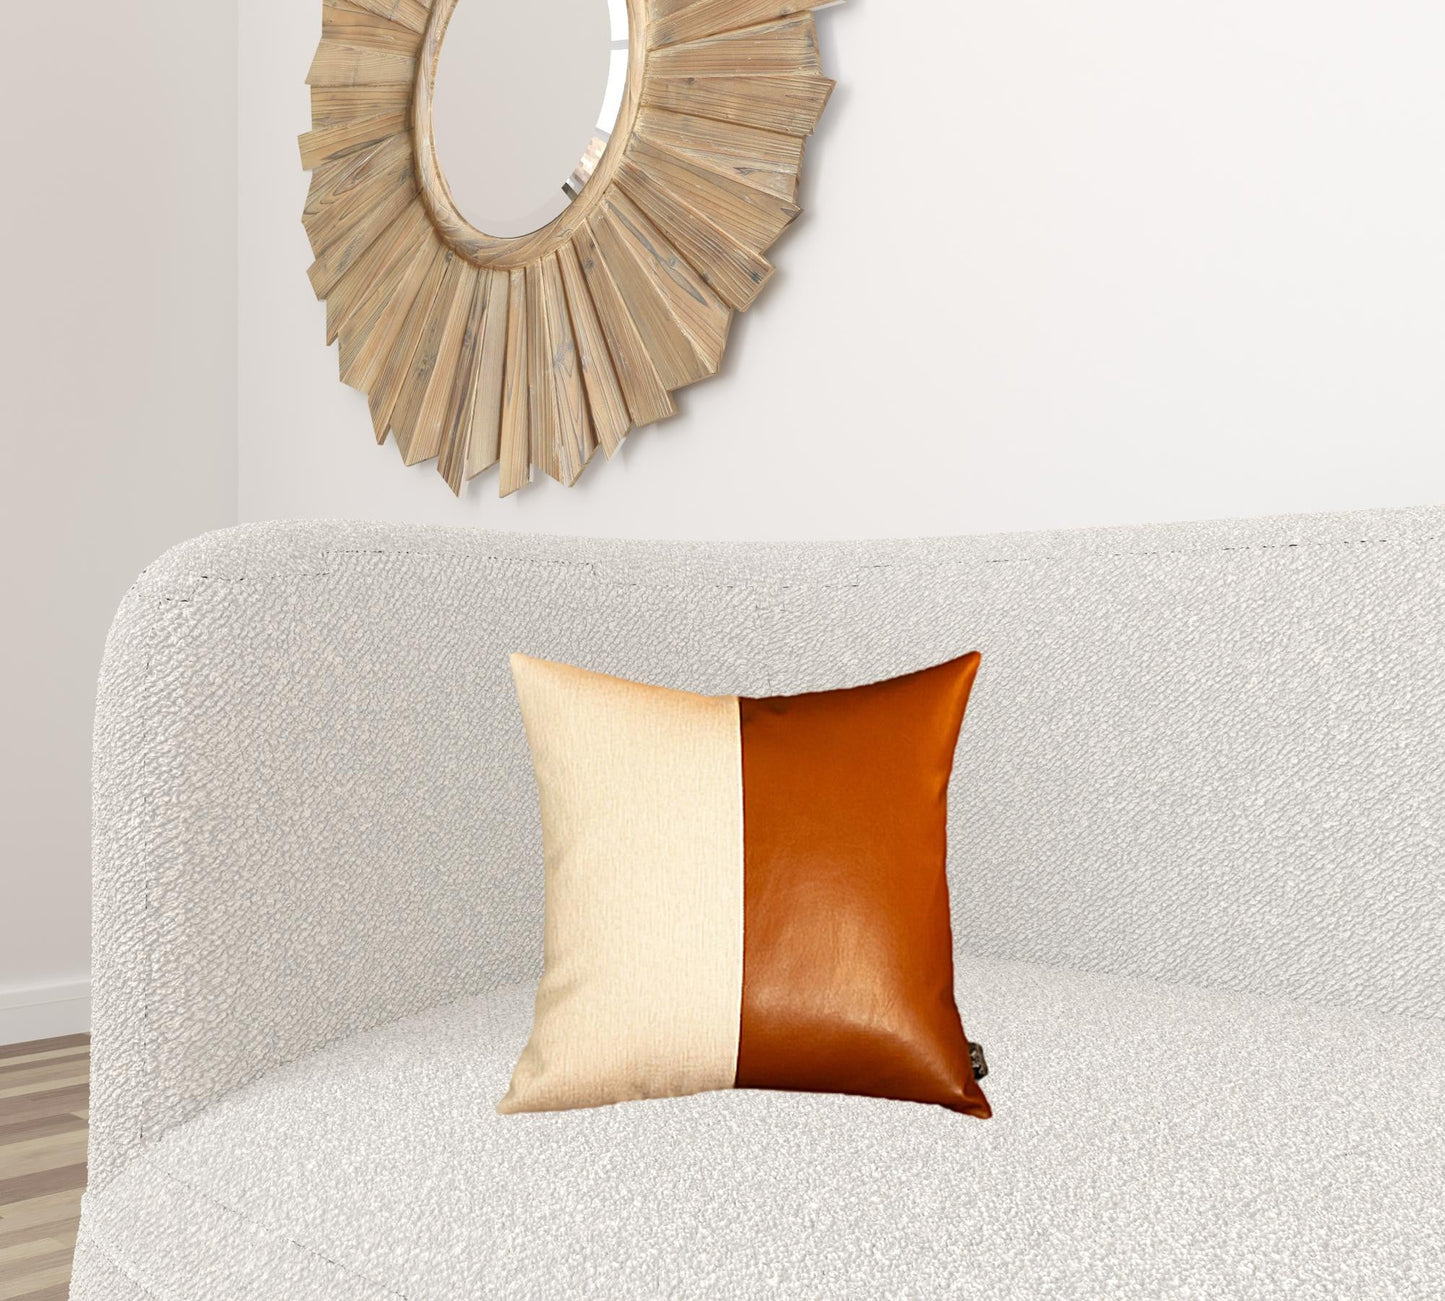 Bisected Brown and White Faux Leather Pillow Cover